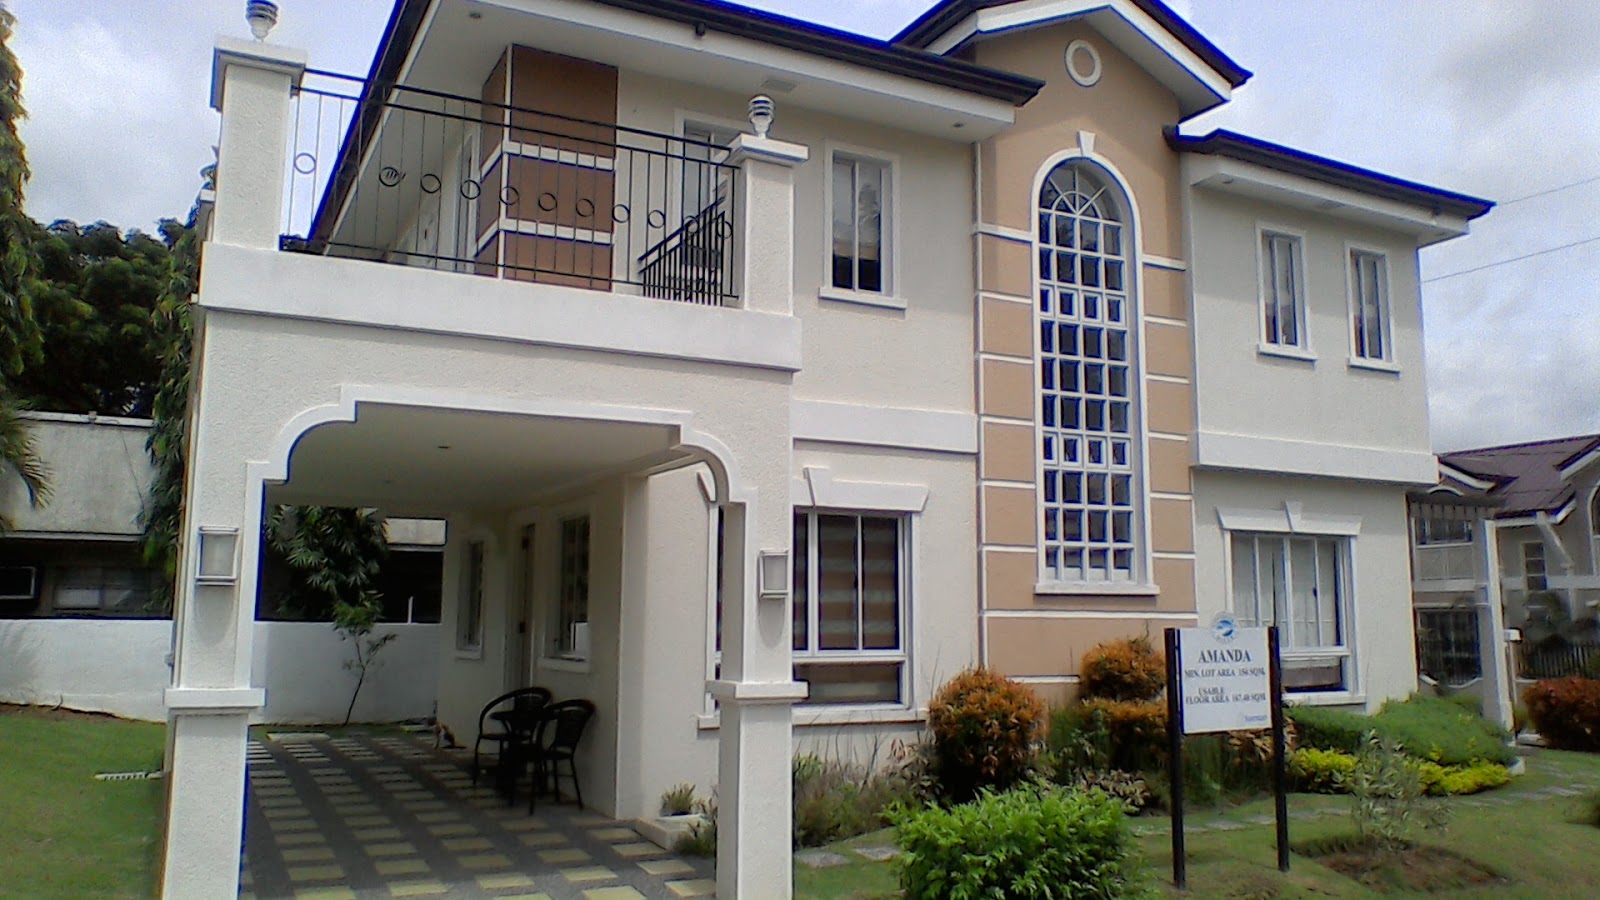 House rush rush for sale in Cavite 10% down payment 90% loanable in bank or In-house financing, Non RFO available